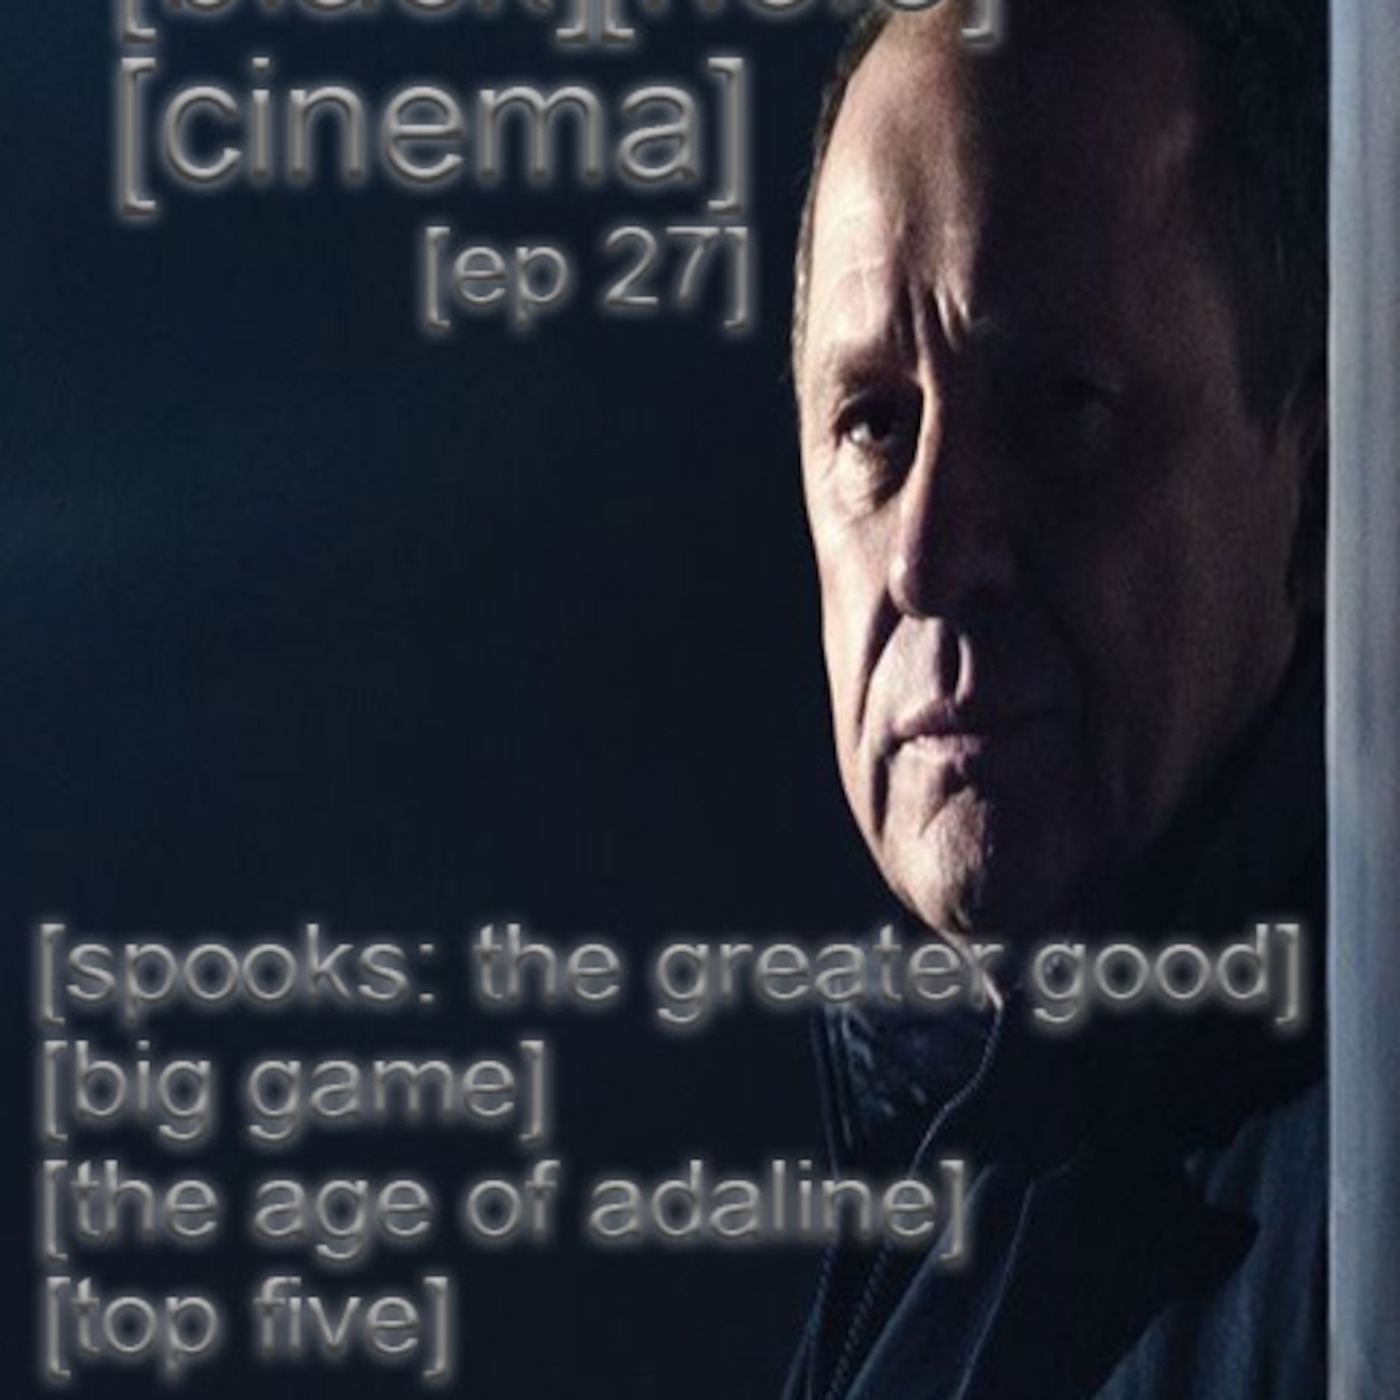 EPISODE 27 - The Age of Adaline, Top Five, Big Game, Spooks: The Greater Good - 15.5.15